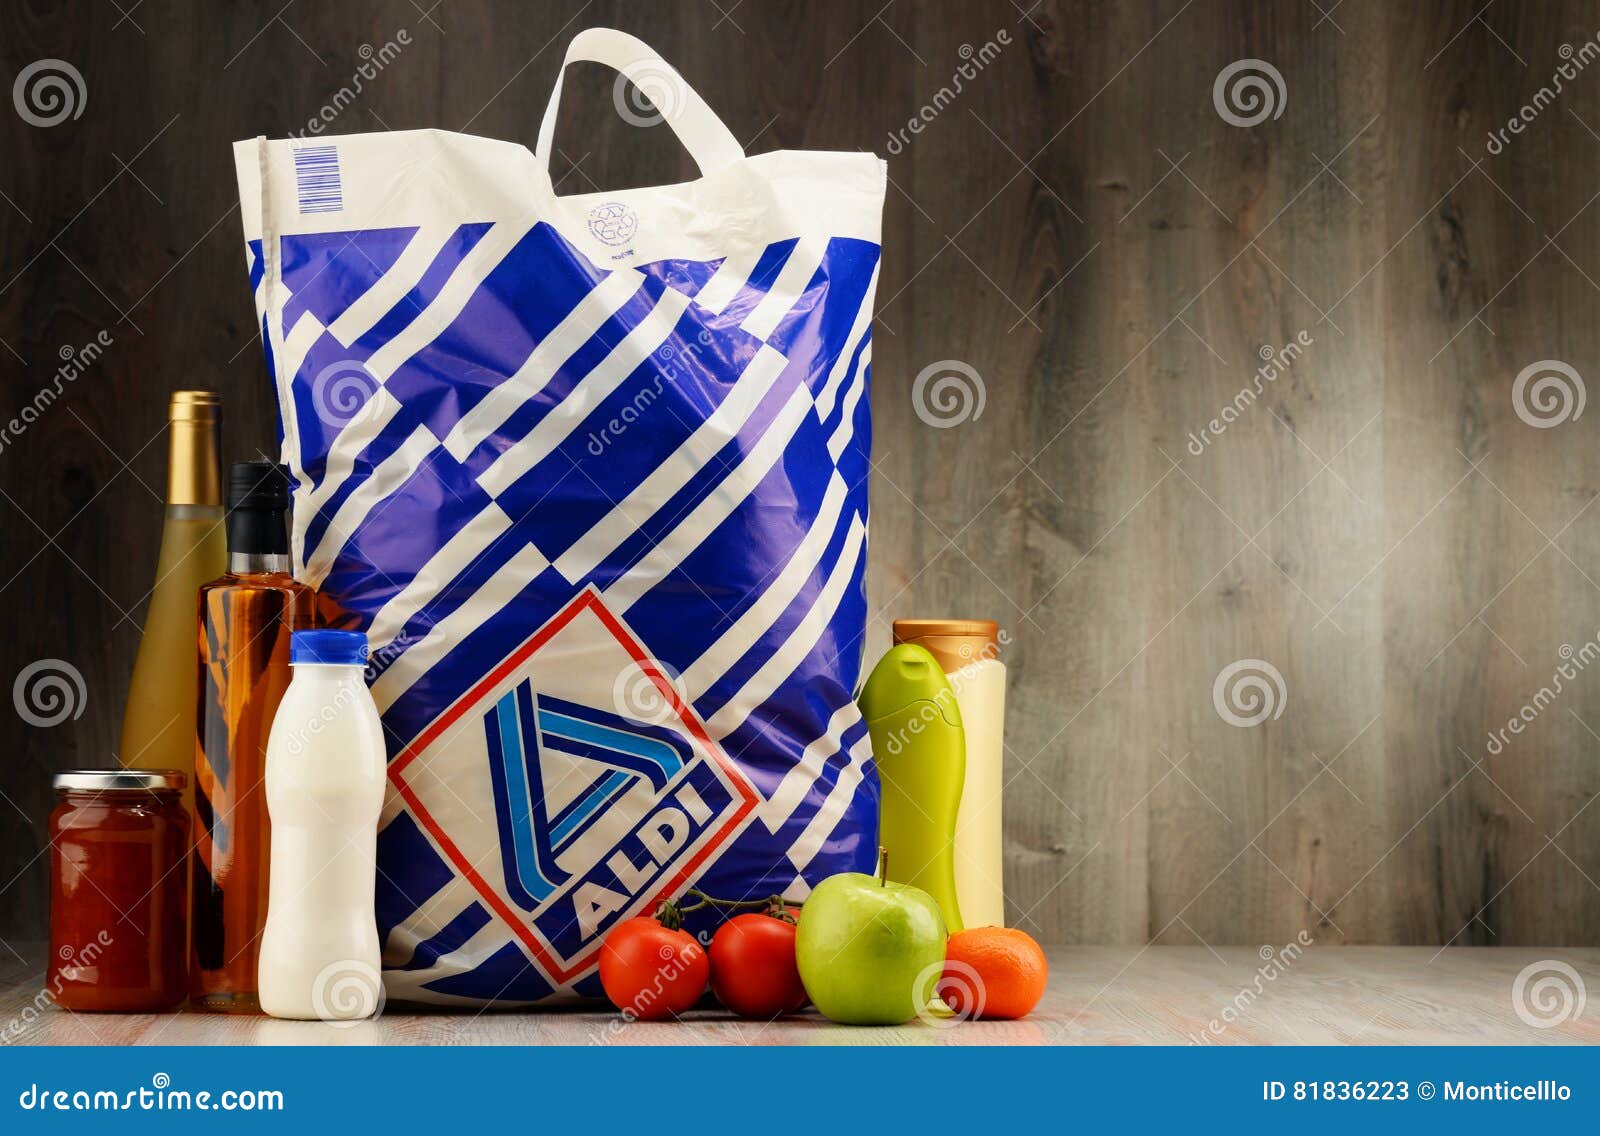 10 Things You Should Know Before Shopping at Aldi - My Joy-Filled Life